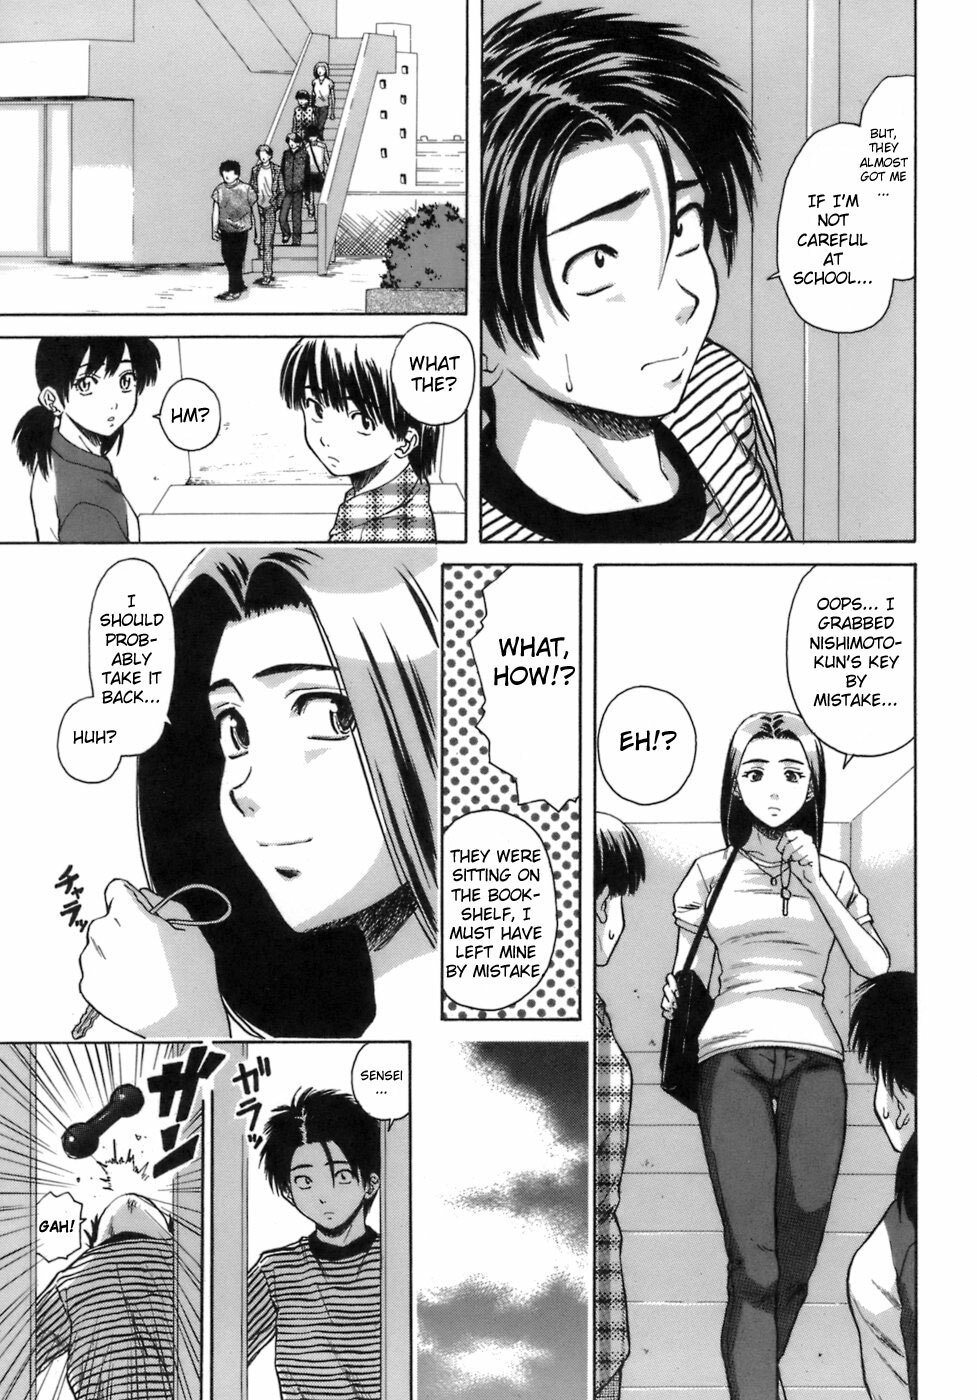 [Fuuga] Kyoushi to Seito to - Teacher and Student Ch. 6 [English] [AKnightWhoSaysNi!] page 7 full